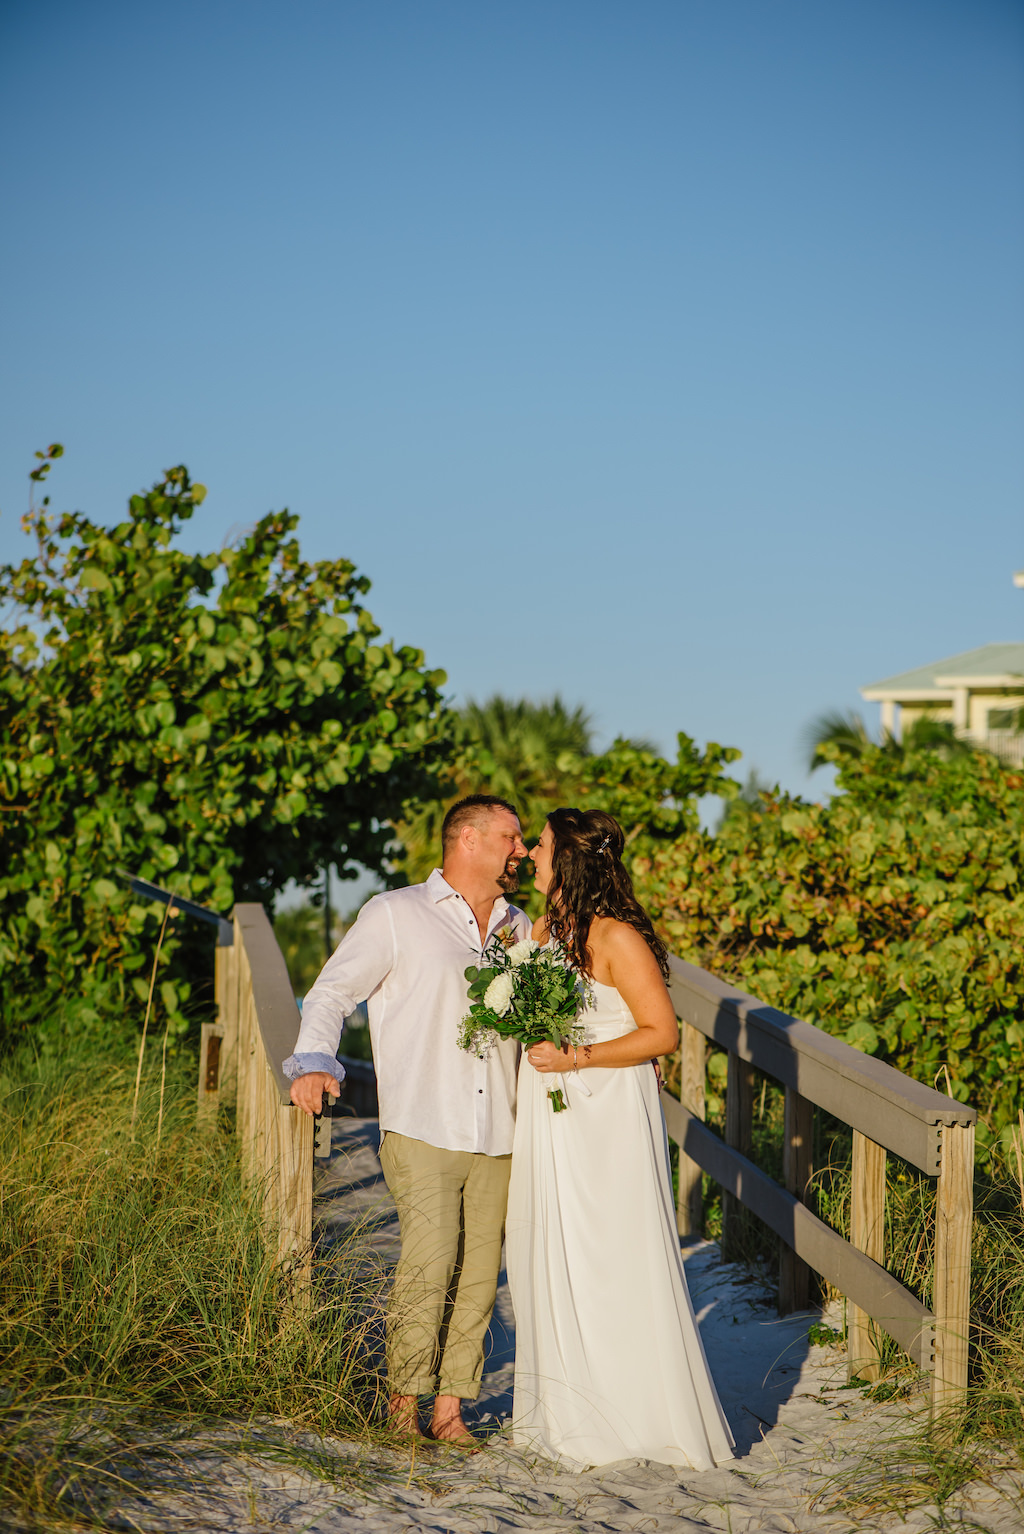 Outdoor Beach Bride and Groom Wedding Portrait, Bride with White and Greenery Bouquet